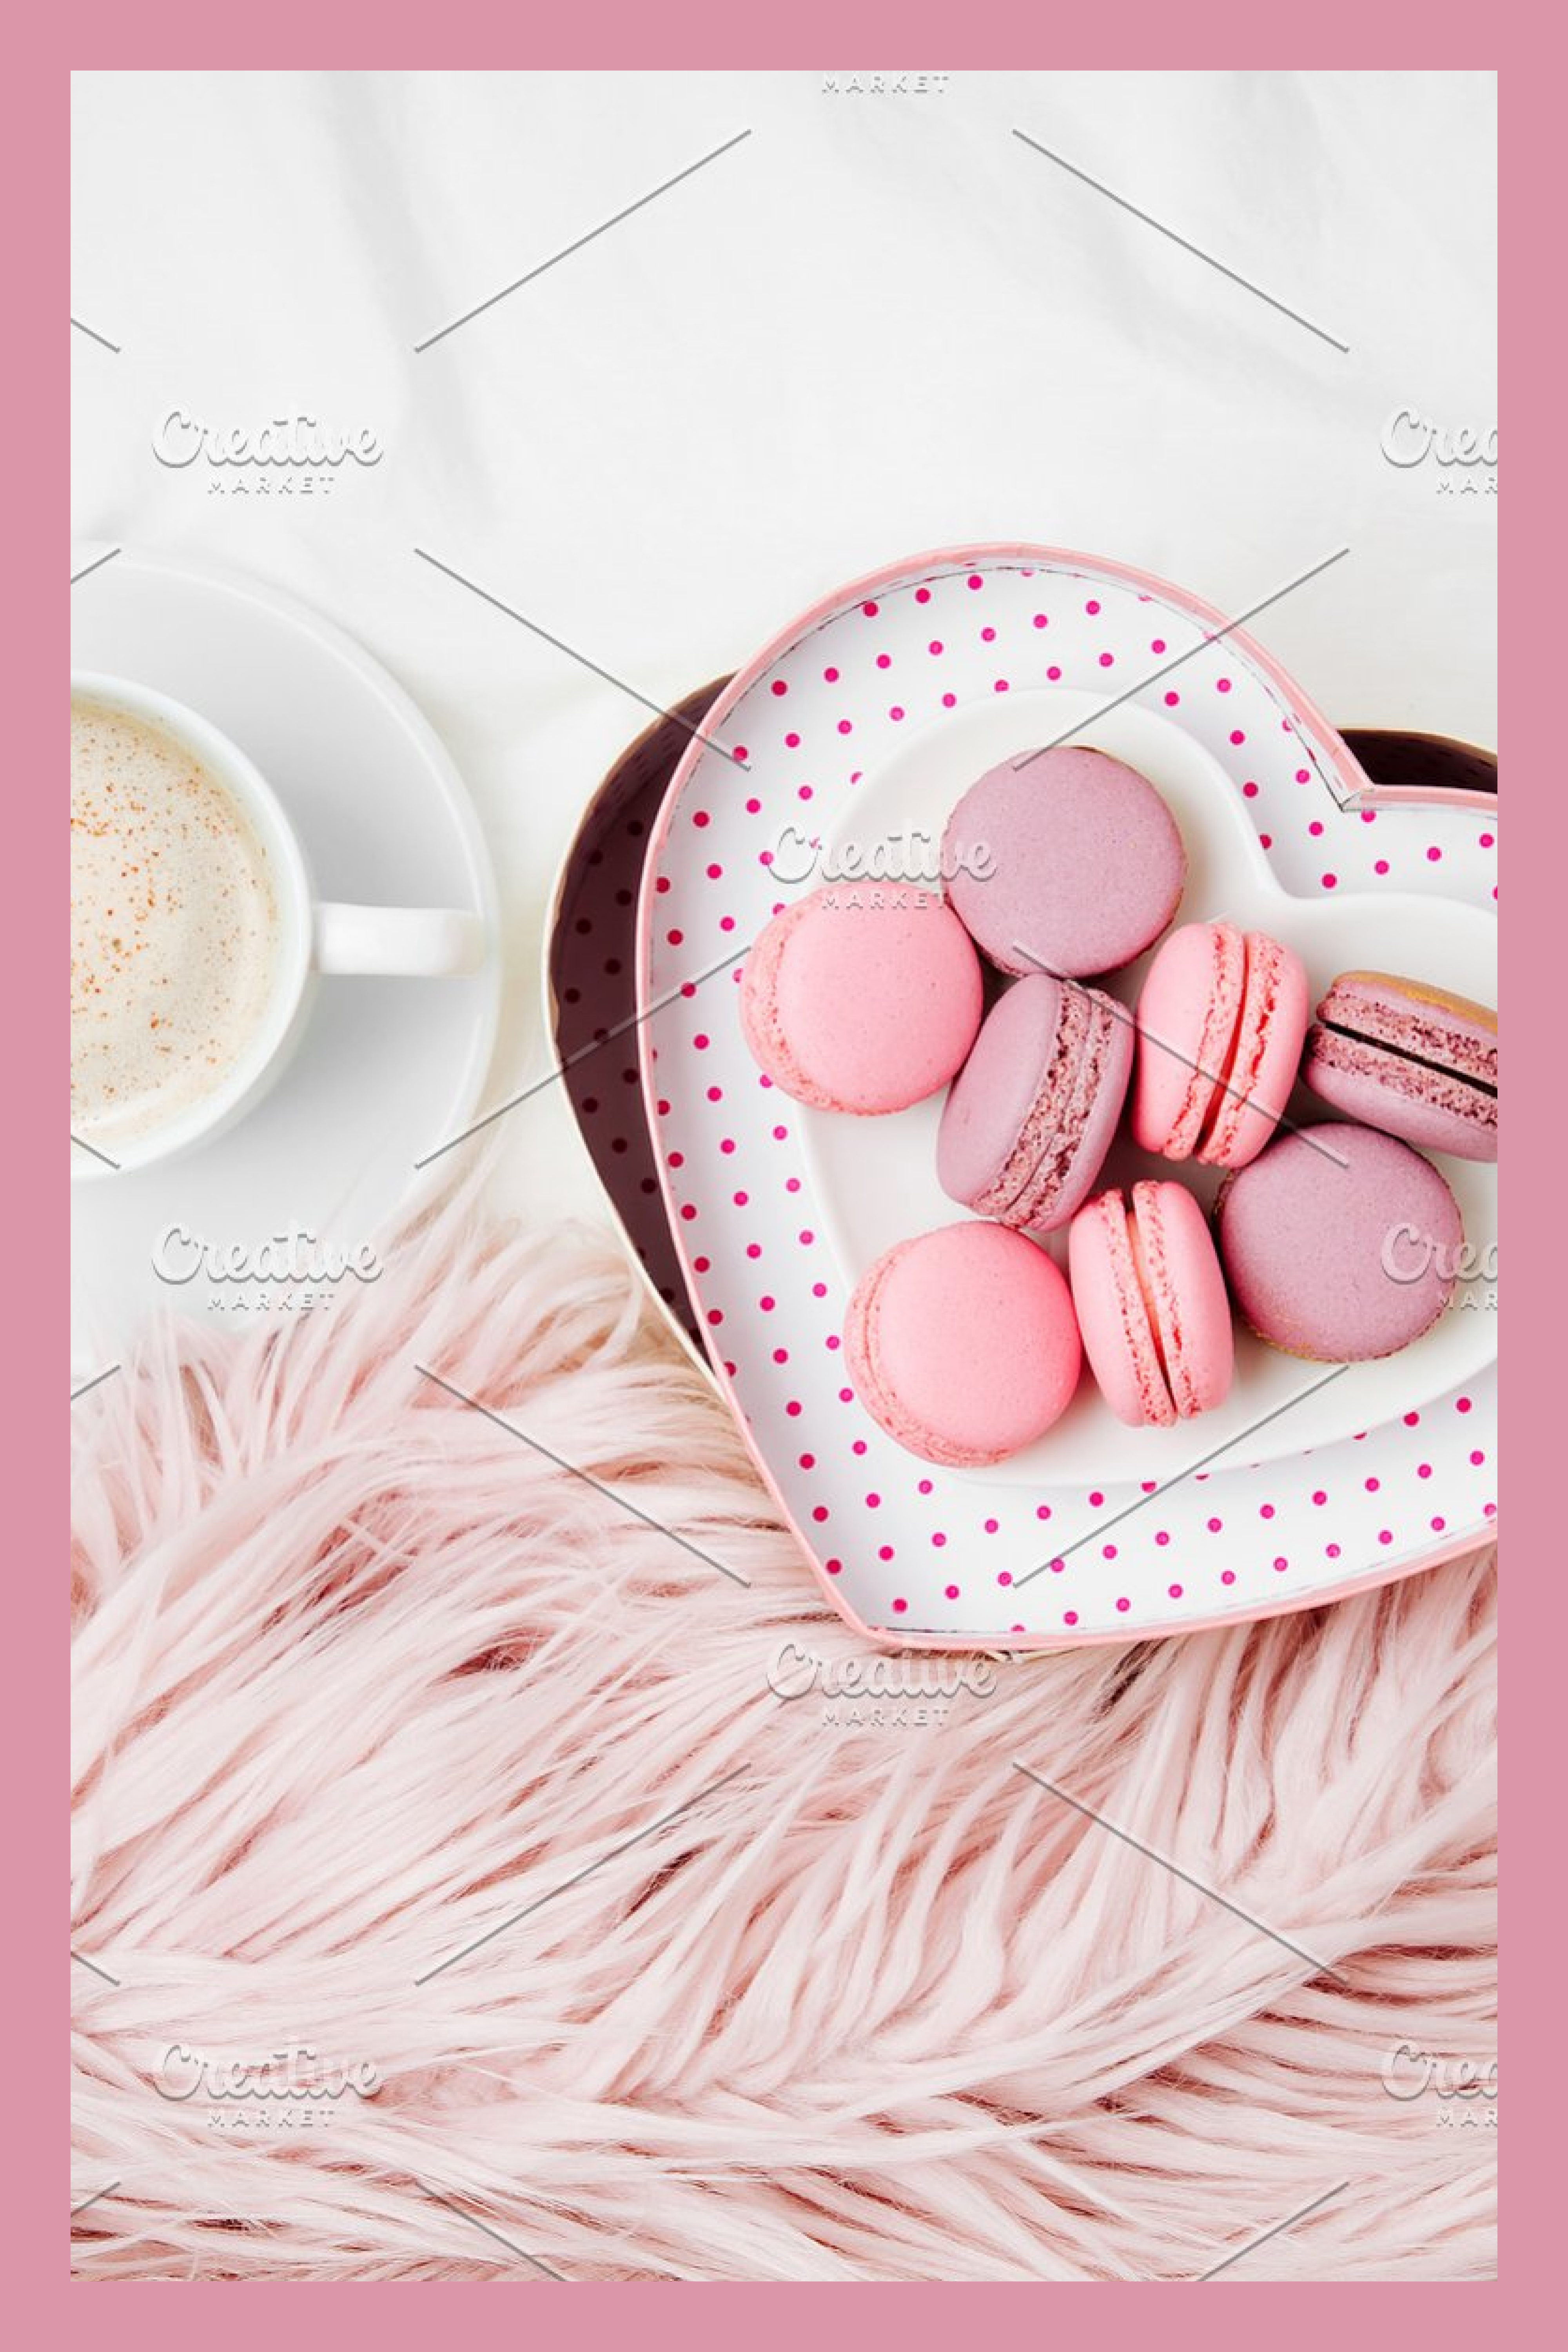 A cup of cappuccino or cocoa combined with a heart-shaped box full of macaroons.